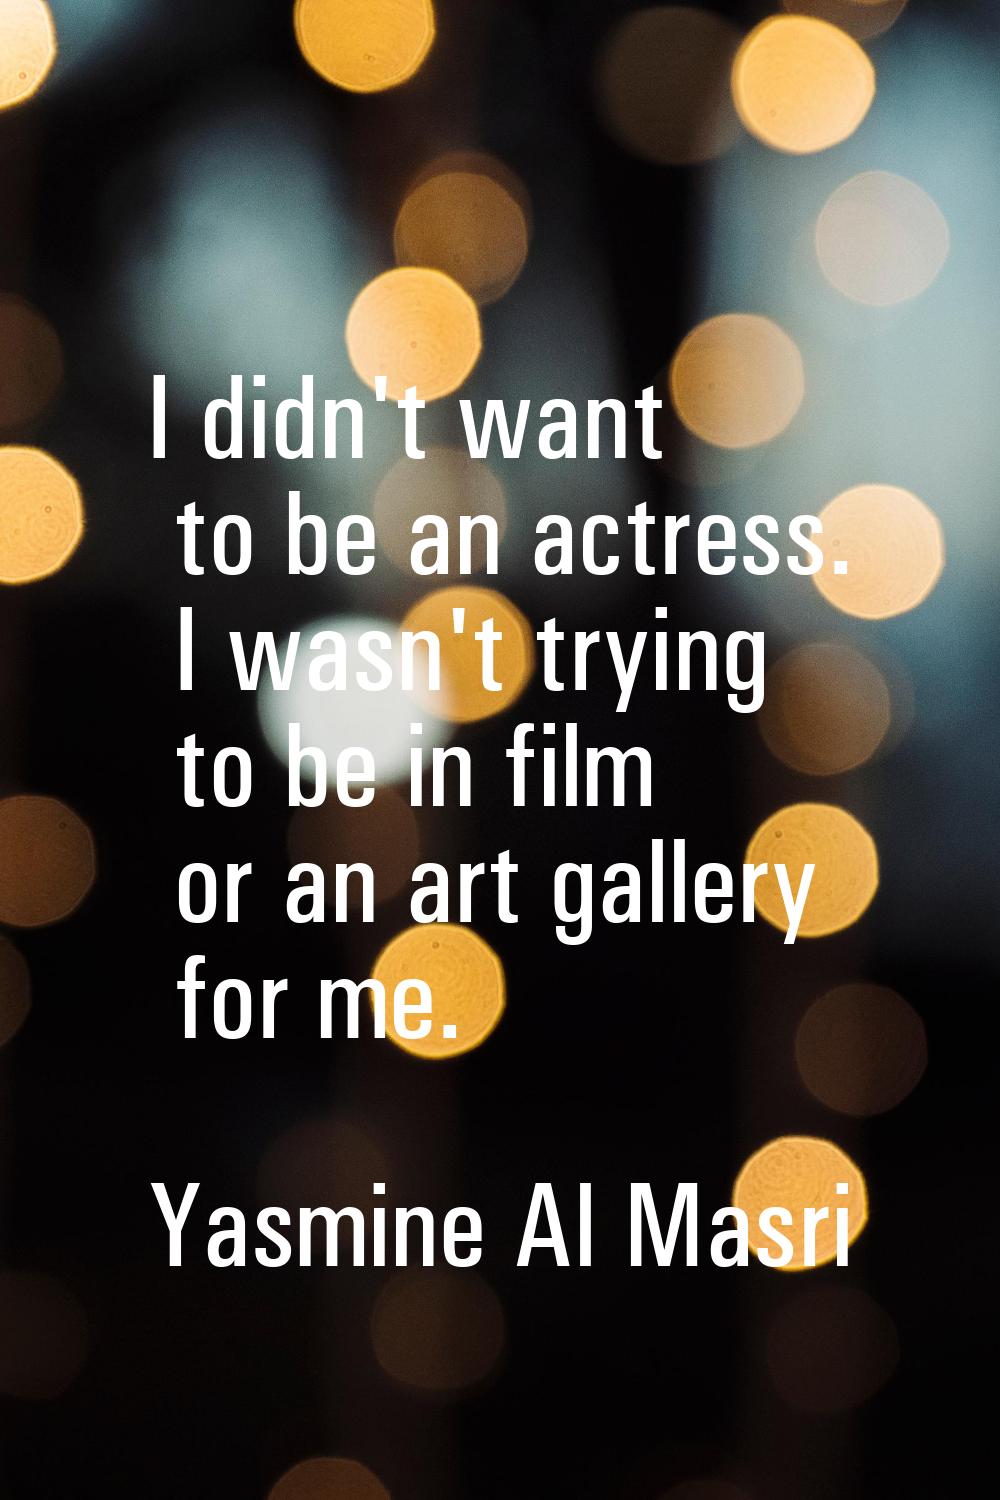 I didn't want to be an actress. I wasn't trying to be in film or an art gallery for me.